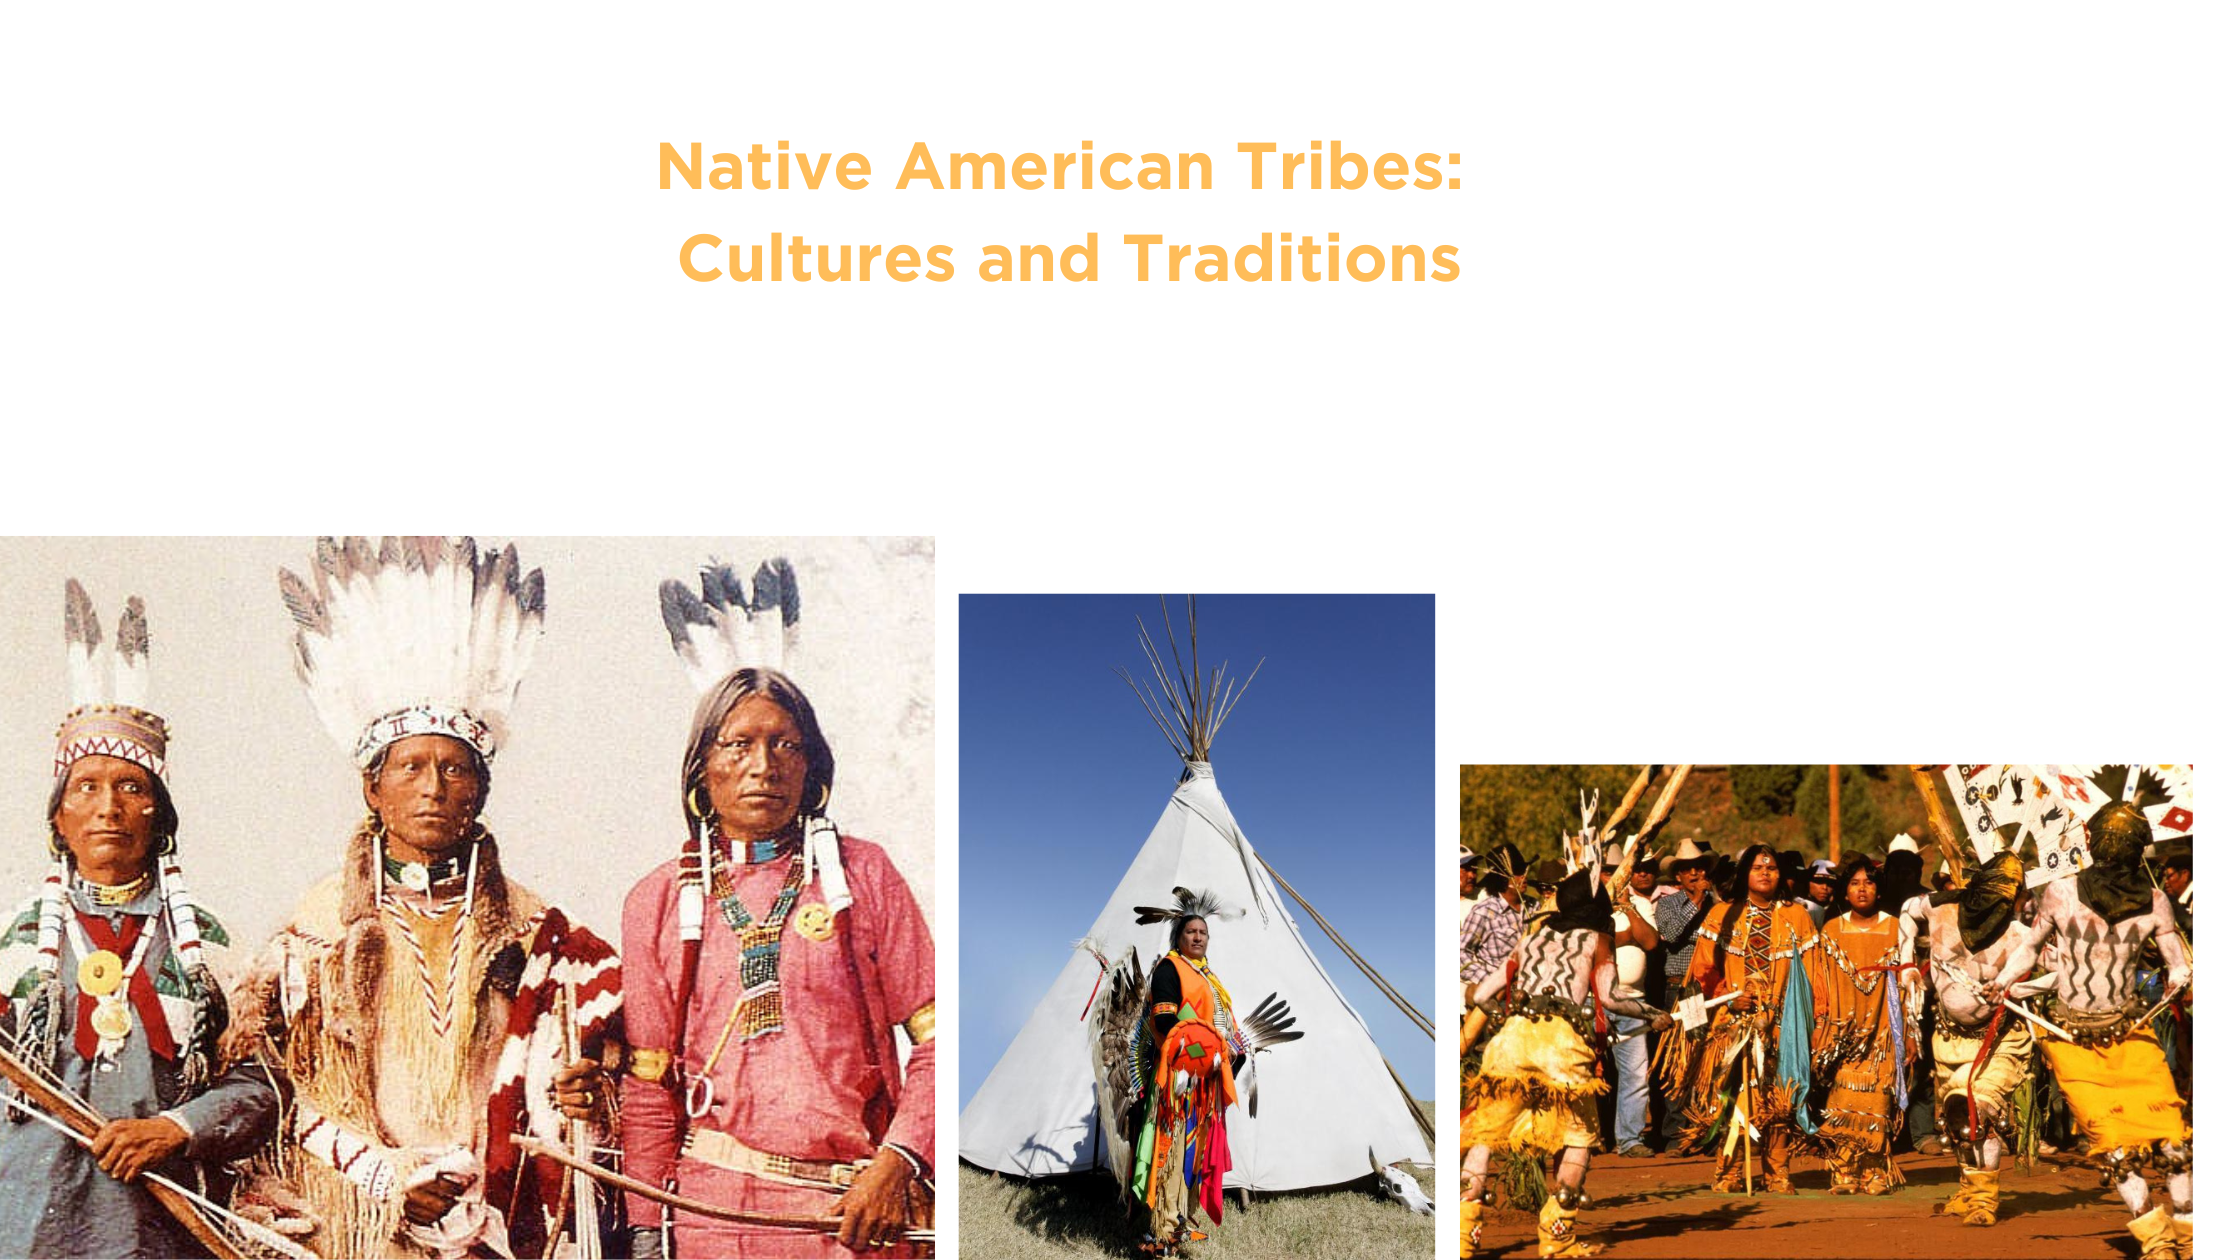 Native American Tribes: Cultures and Traditions